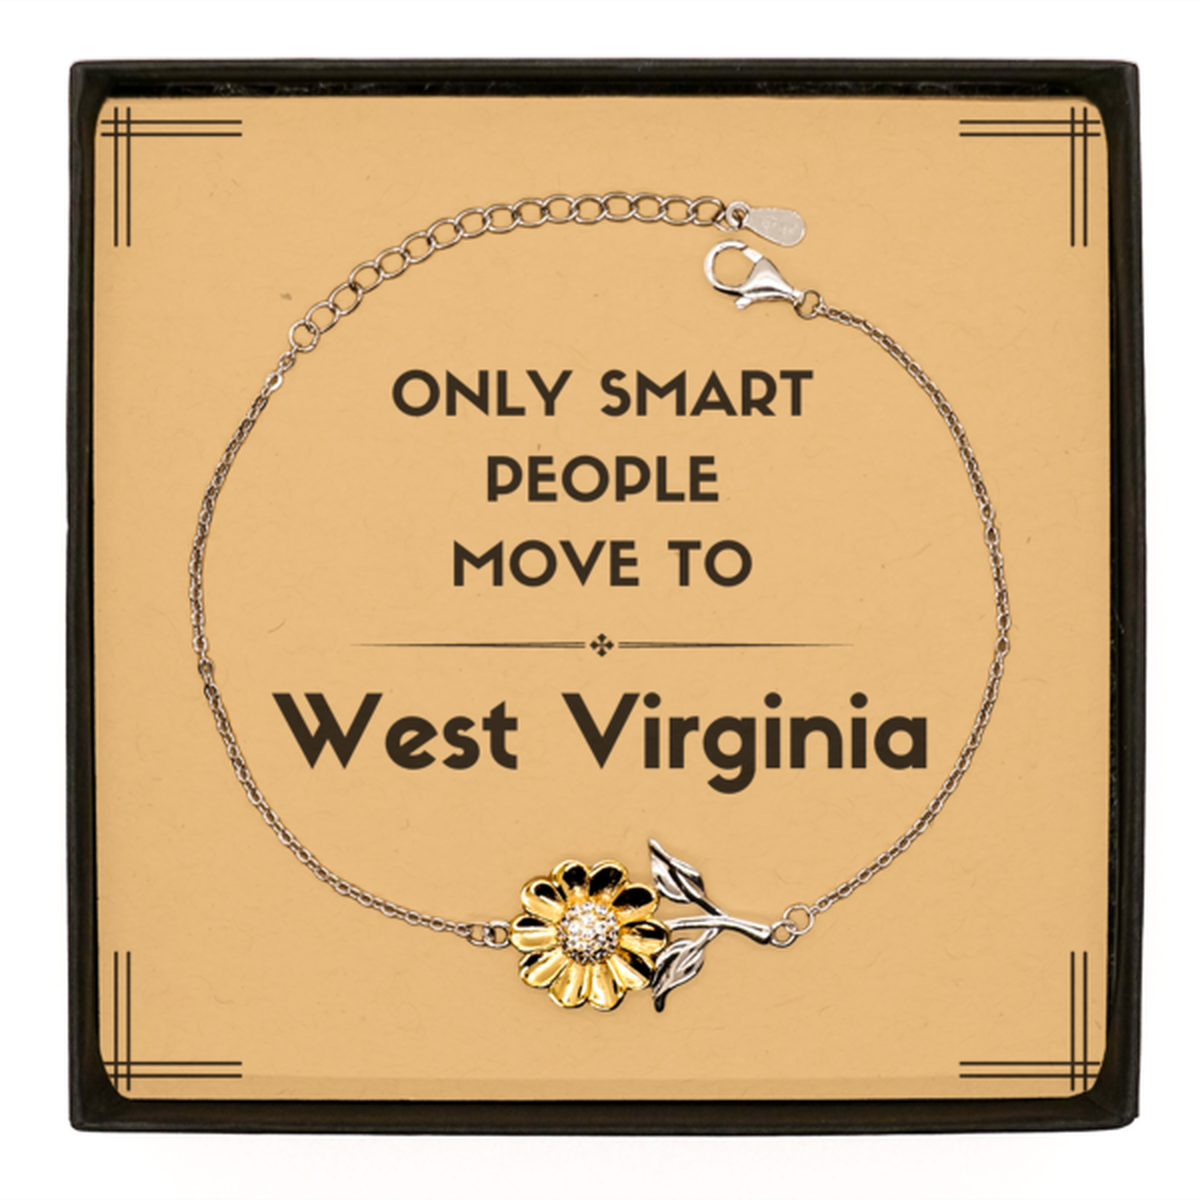 Only smart people move to West Virginia Sunflower Bracelet, Message Card Gifts For West Virginia, Move to West Virginia Gifts for Friends Coworker Funny Saying Quote